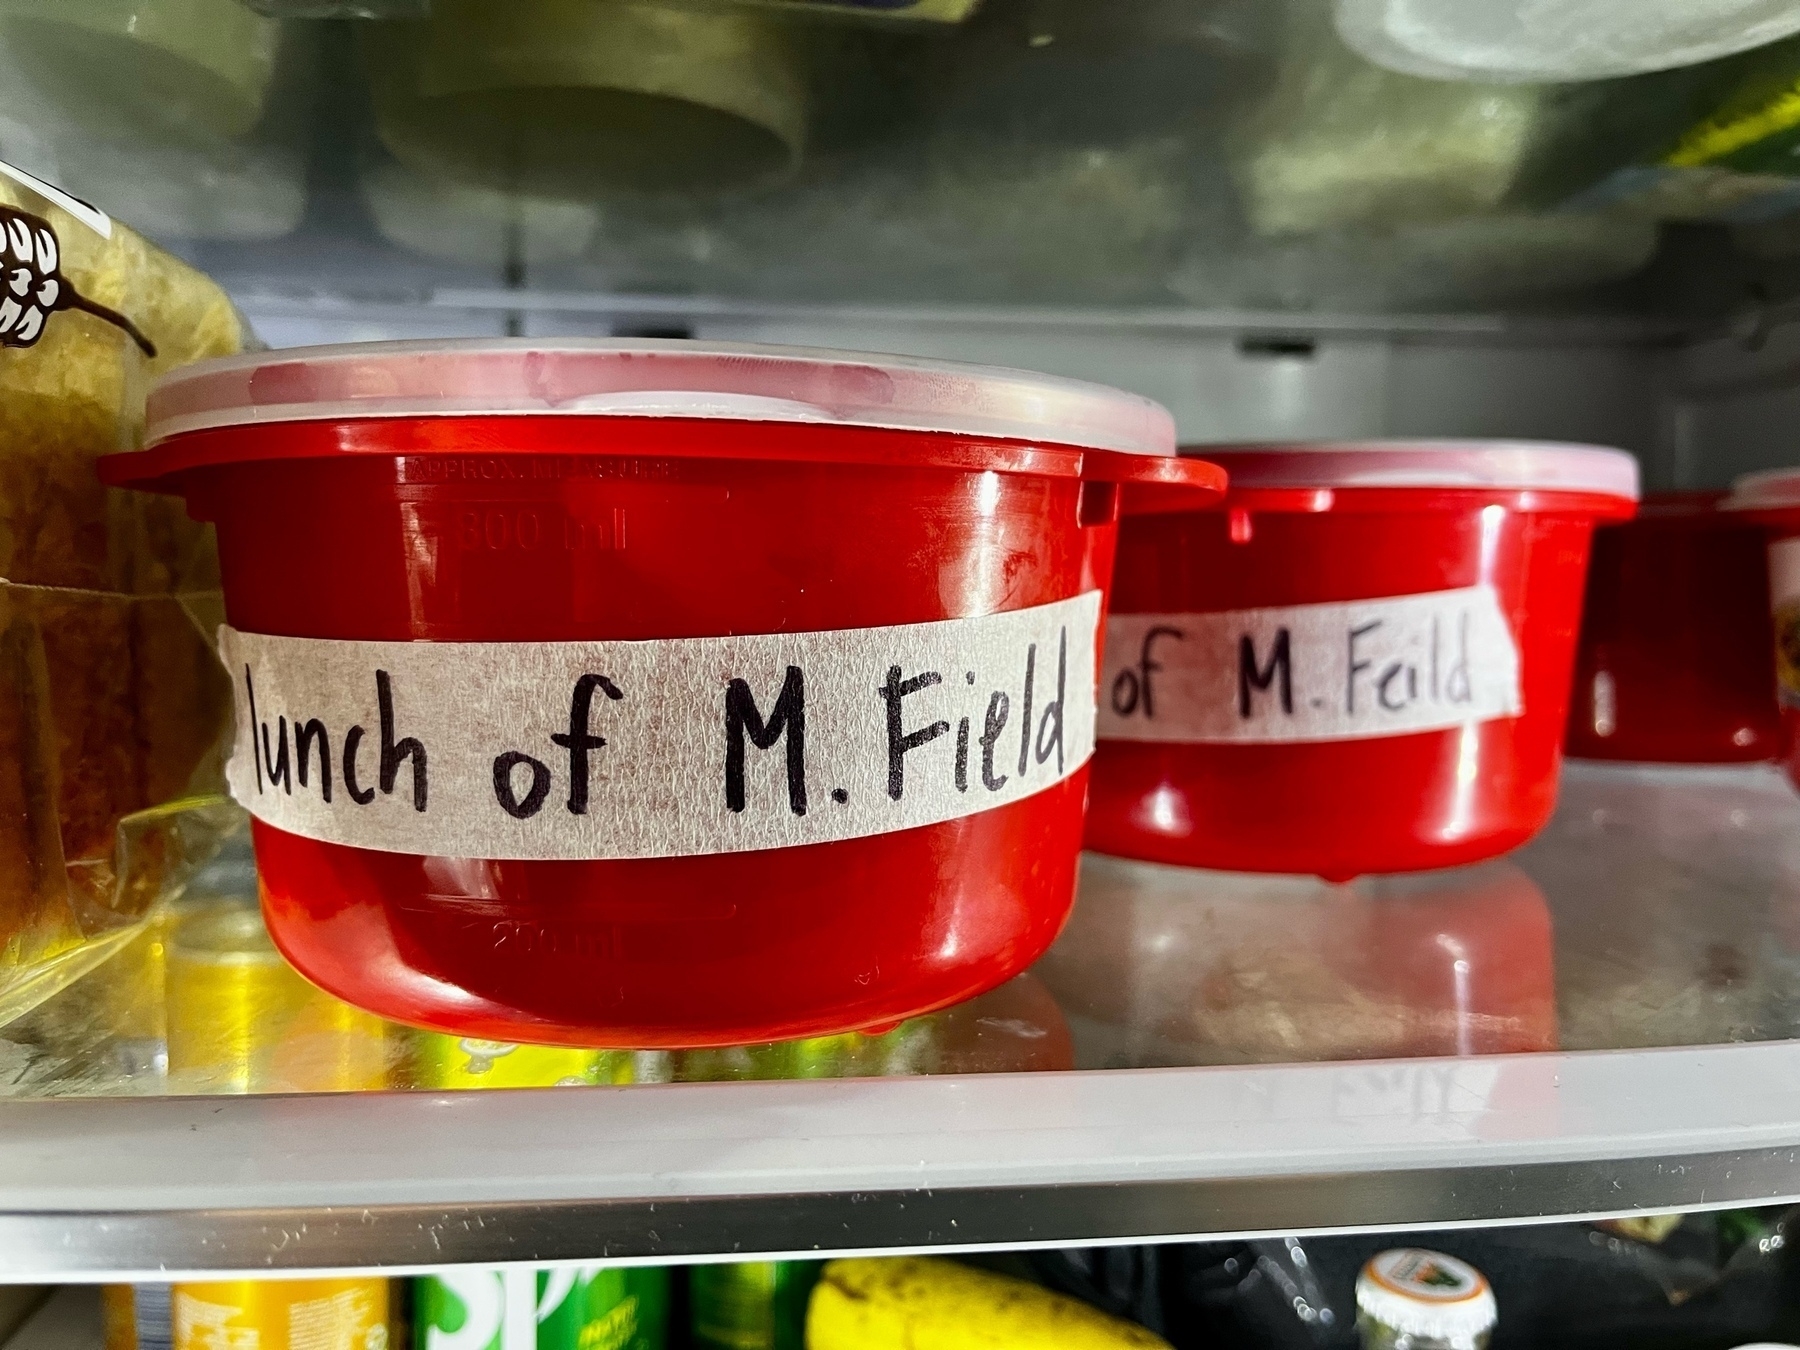 Two containers with the text 'lunch of Mr. Feld' deliberately misspelt as 'Field' and 'Feild'